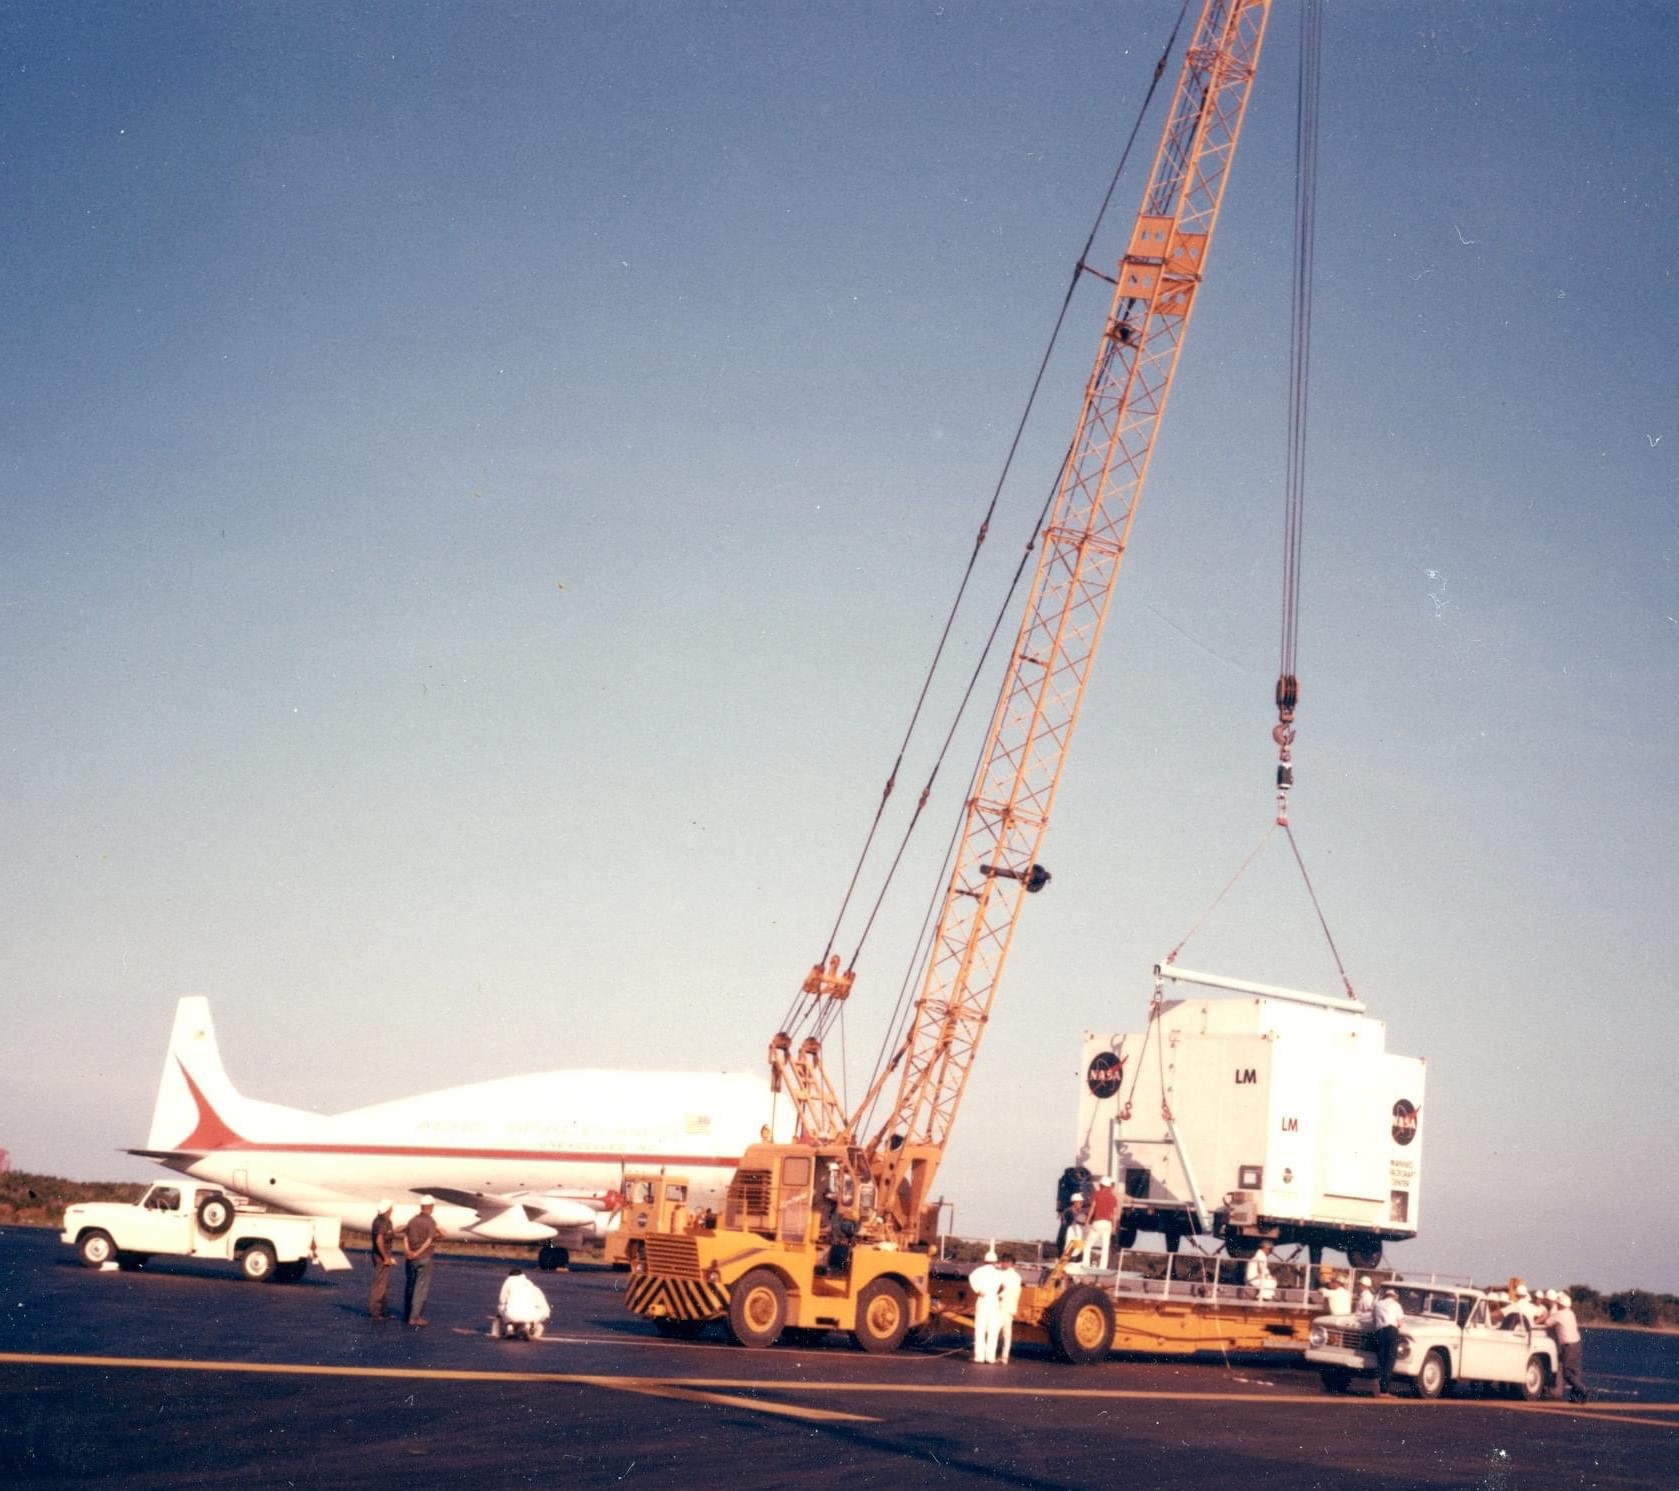 The ascent stage of the Apollo 13 Lunar Module arrives at KSC